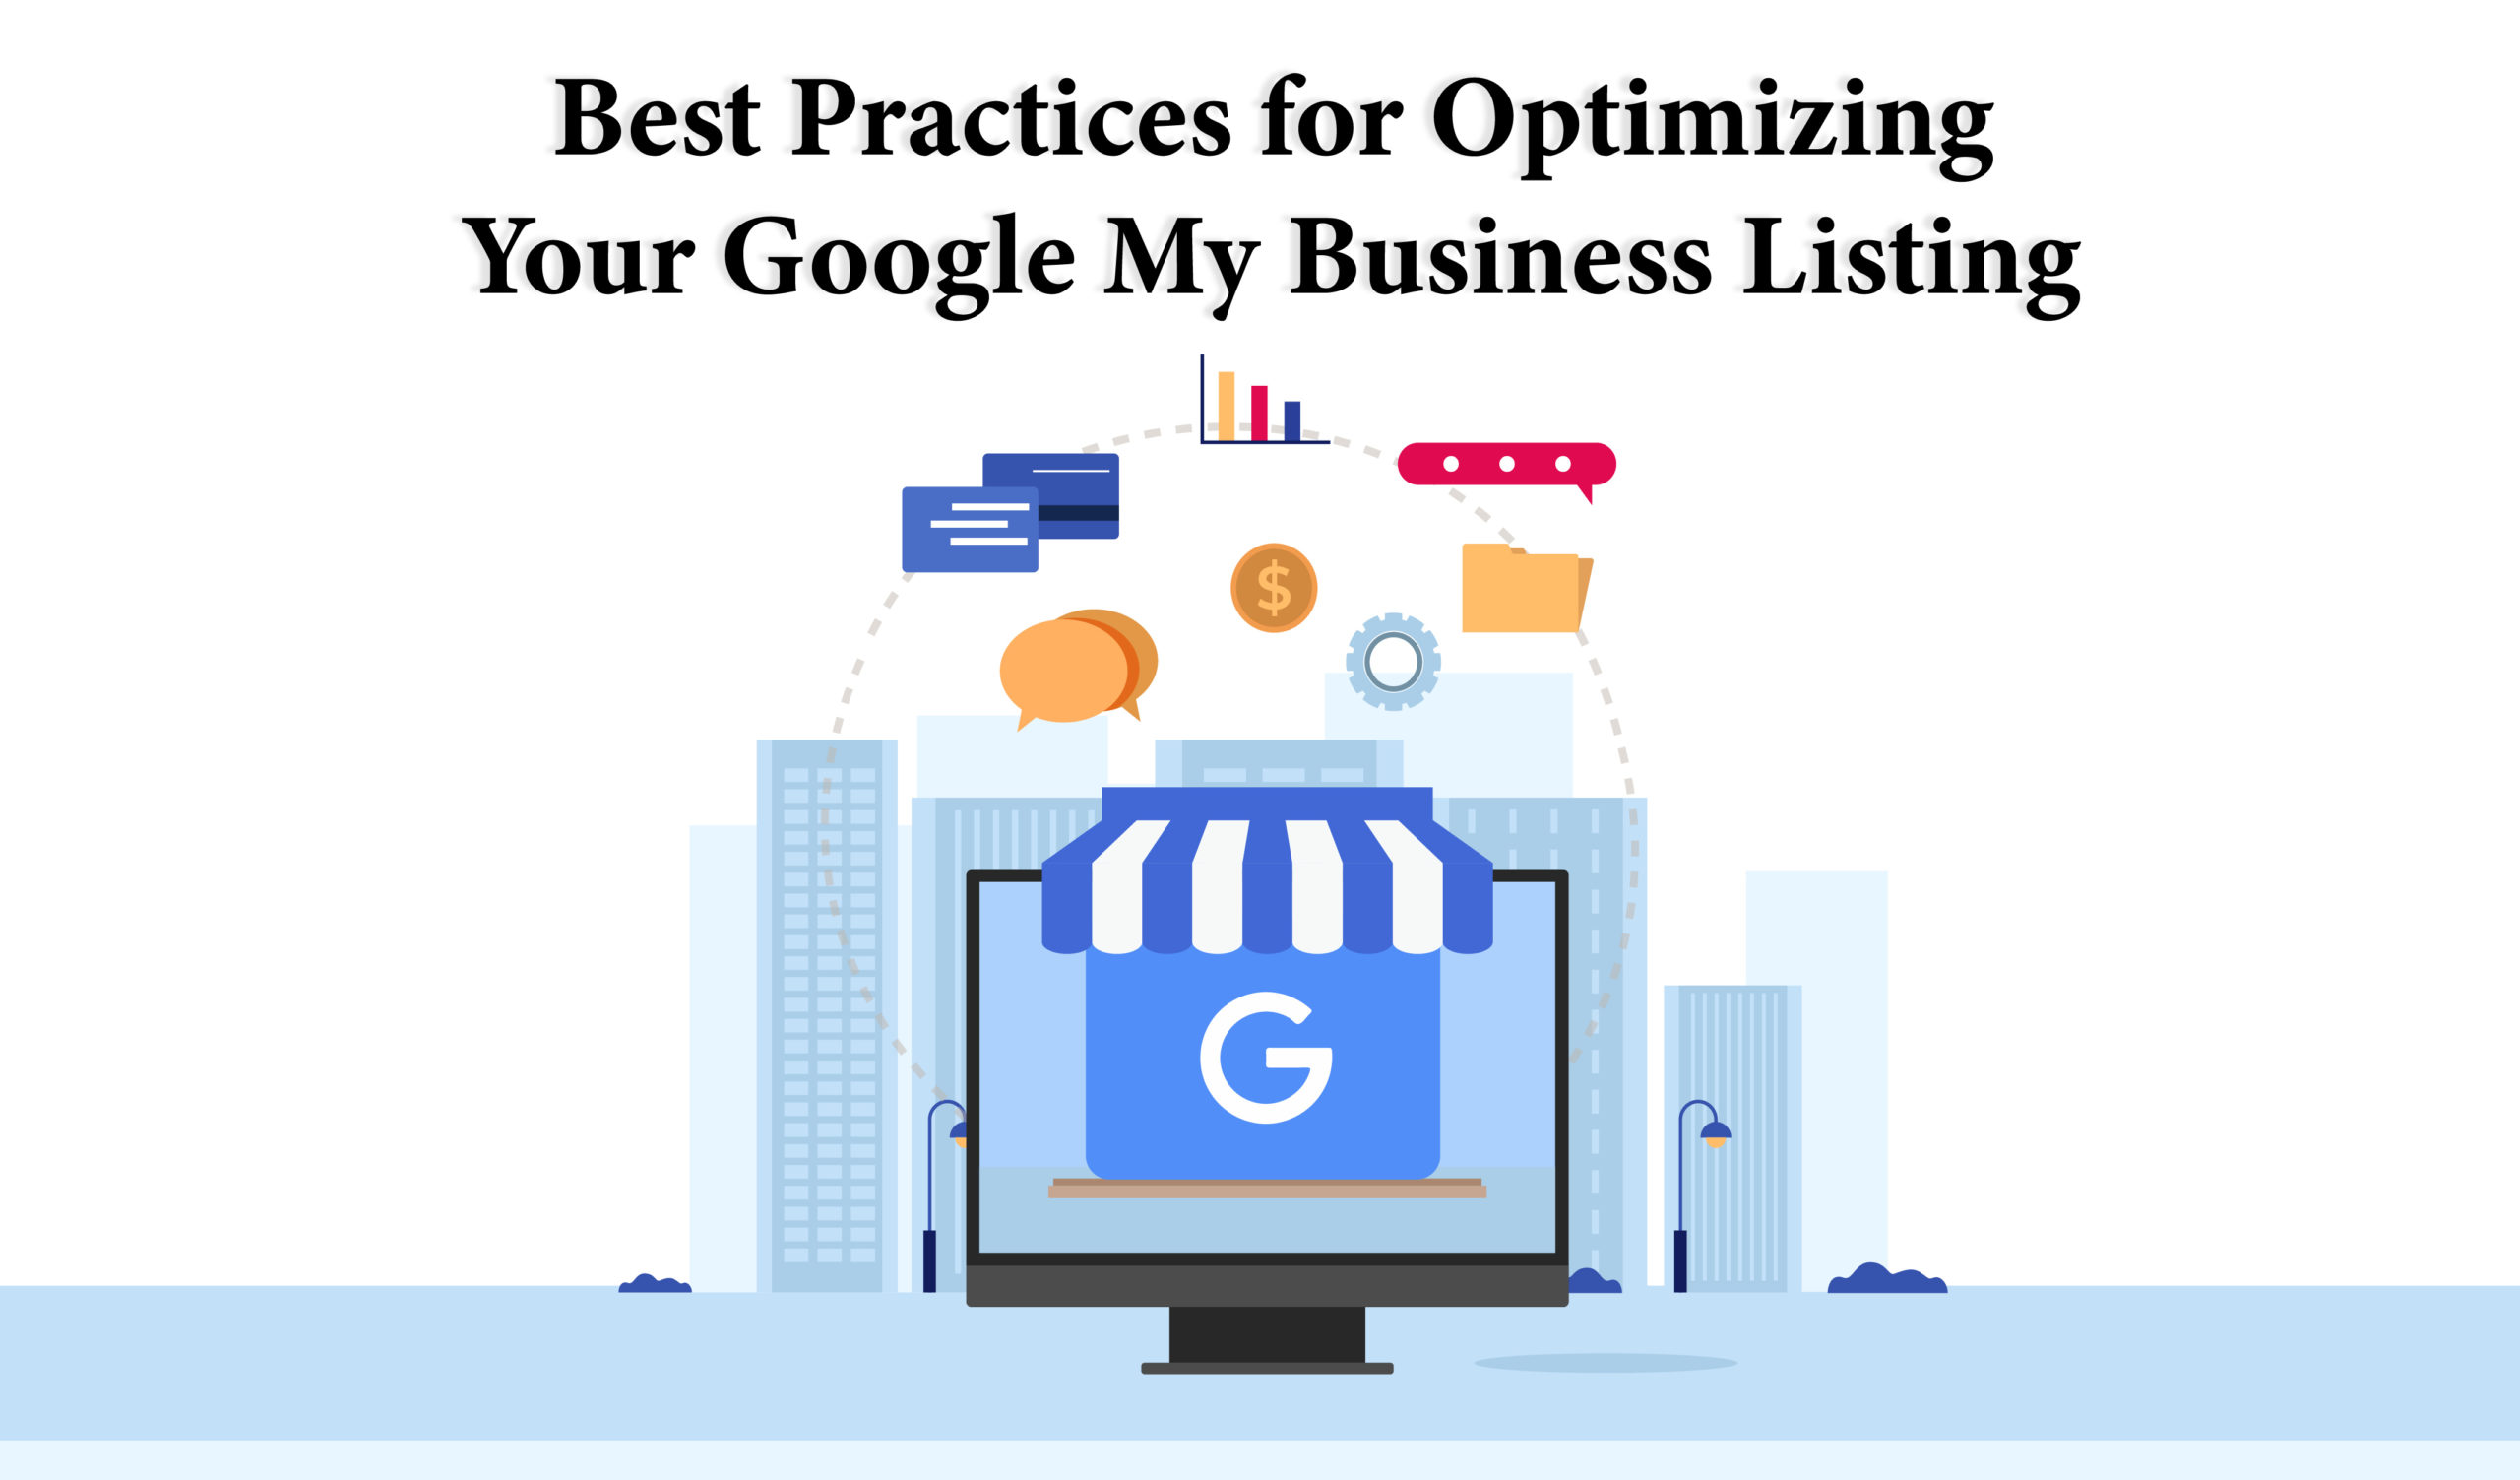 Best Practices for Optimizing Your Google My Business Listing